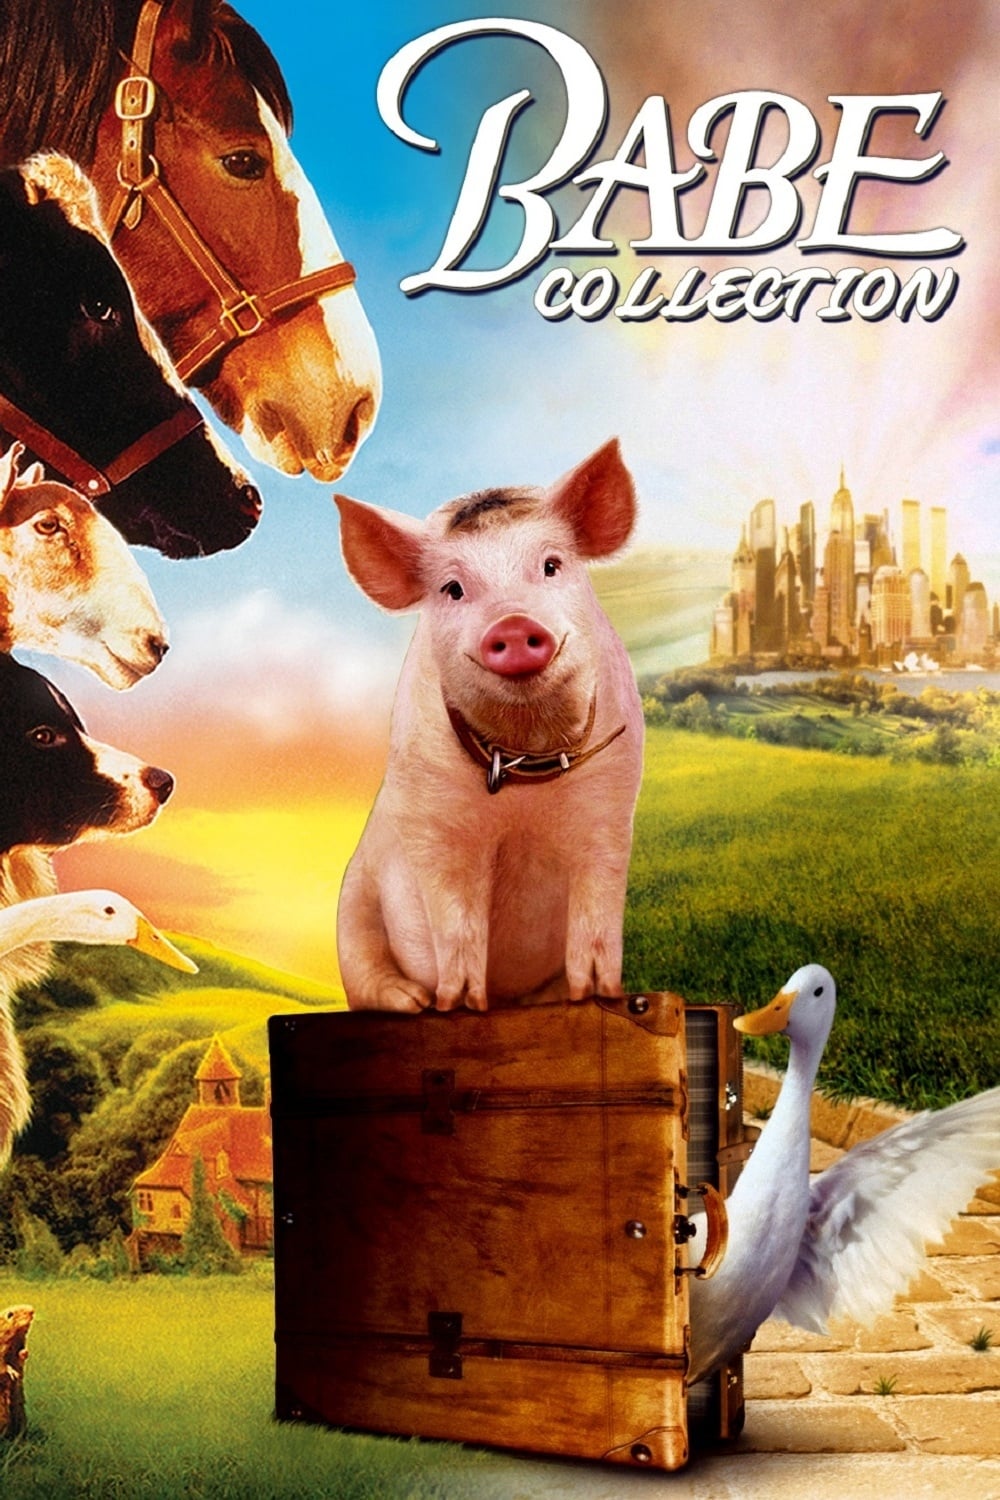 Babe Collection Posters The Movie Database TMDB